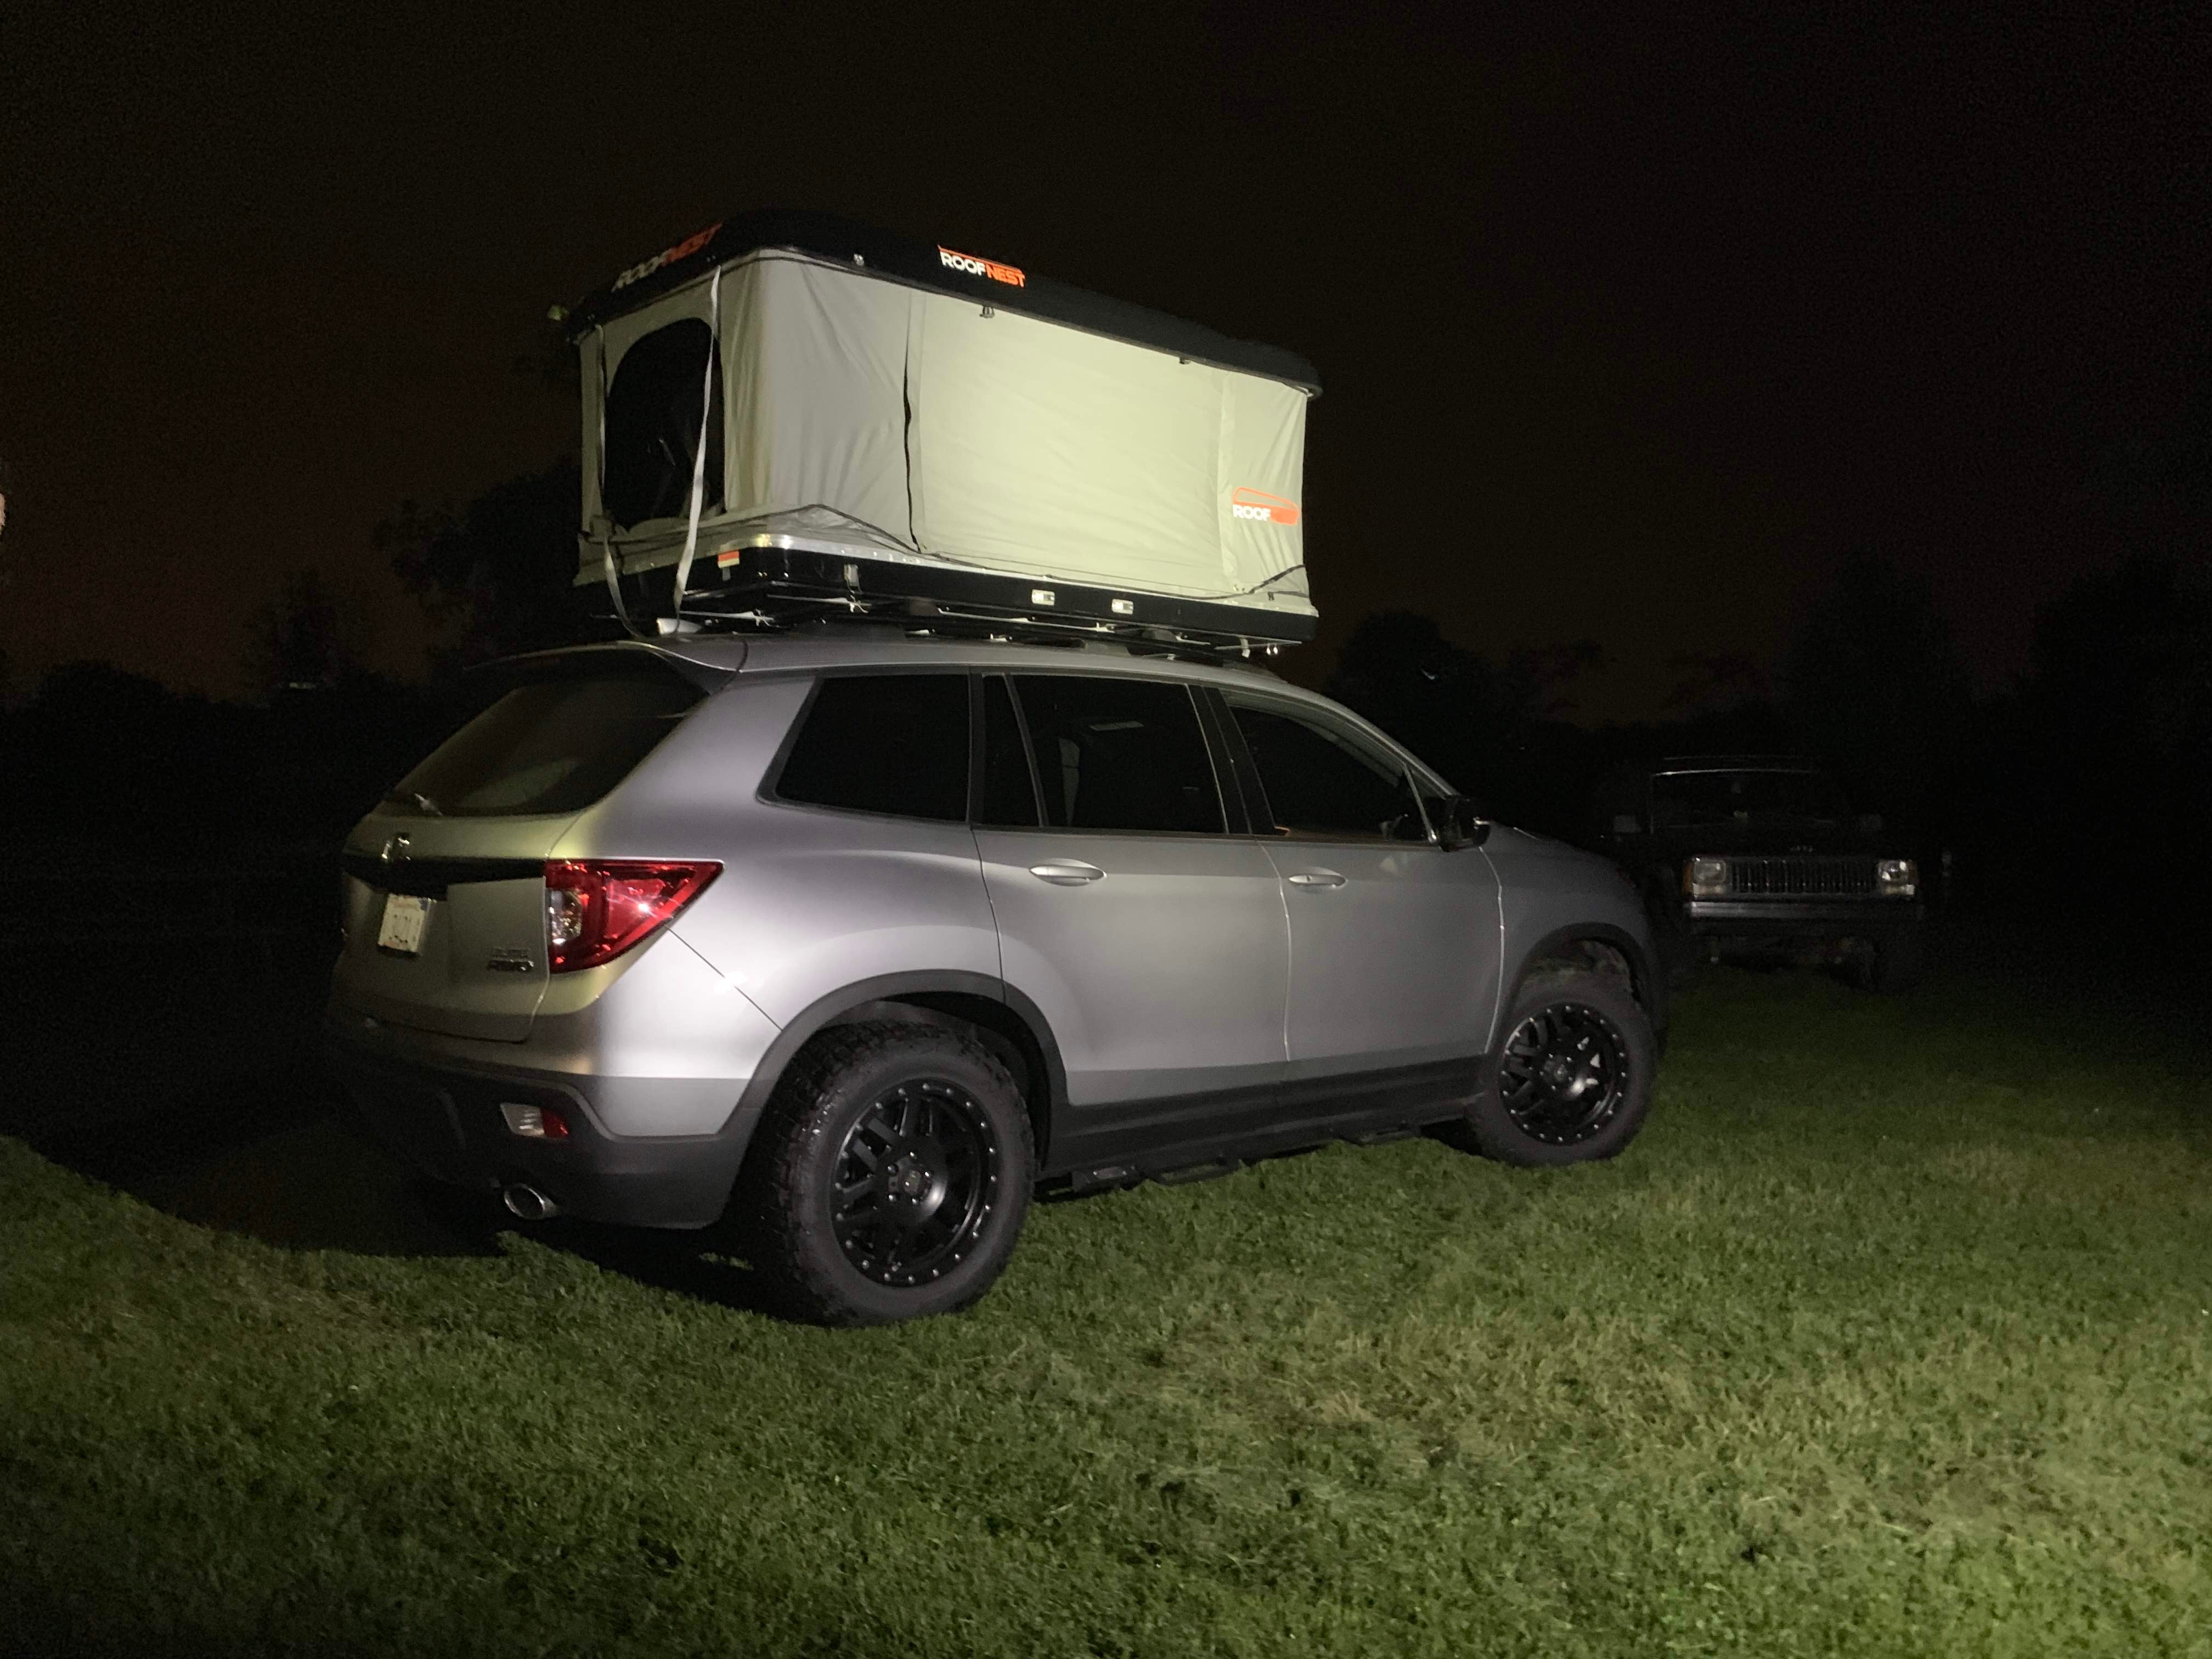 I Slept on the Roof of a Honda Passport to Prove That Hotels Are for Suckers